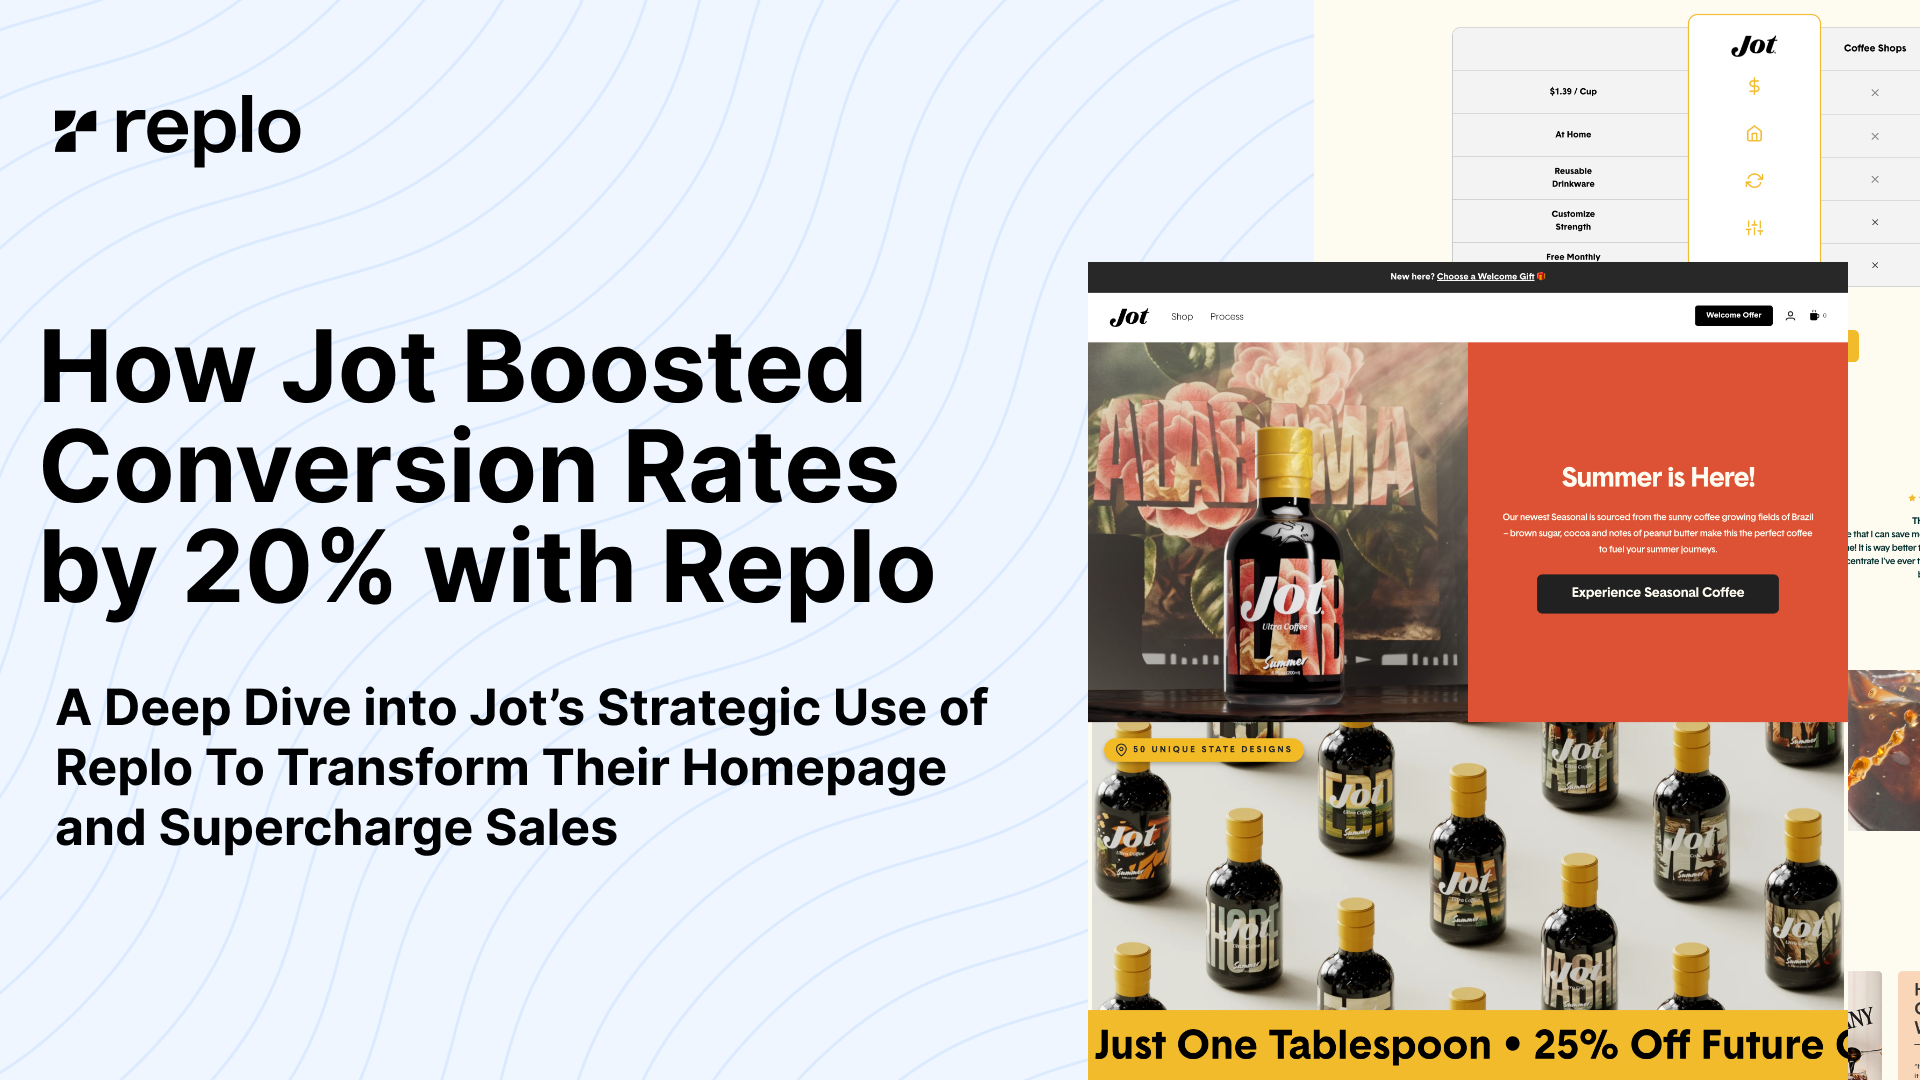 How Jot Boosted Conversion Rates by 20%